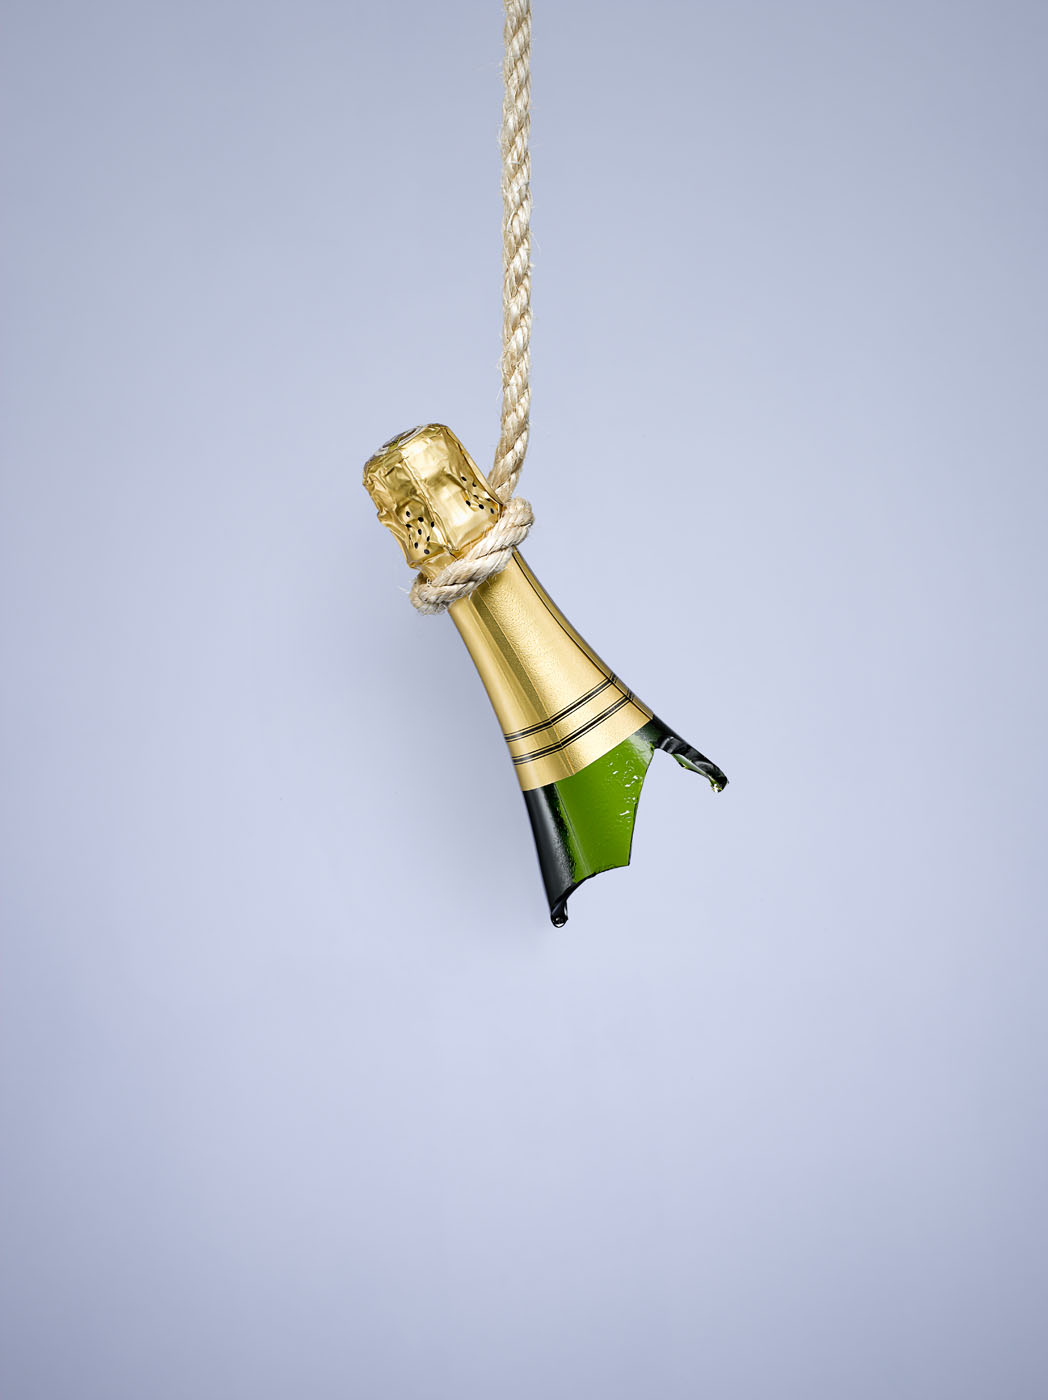 Smashed champagne bottle on blue by Alexander Kent London based still life and product photographer.